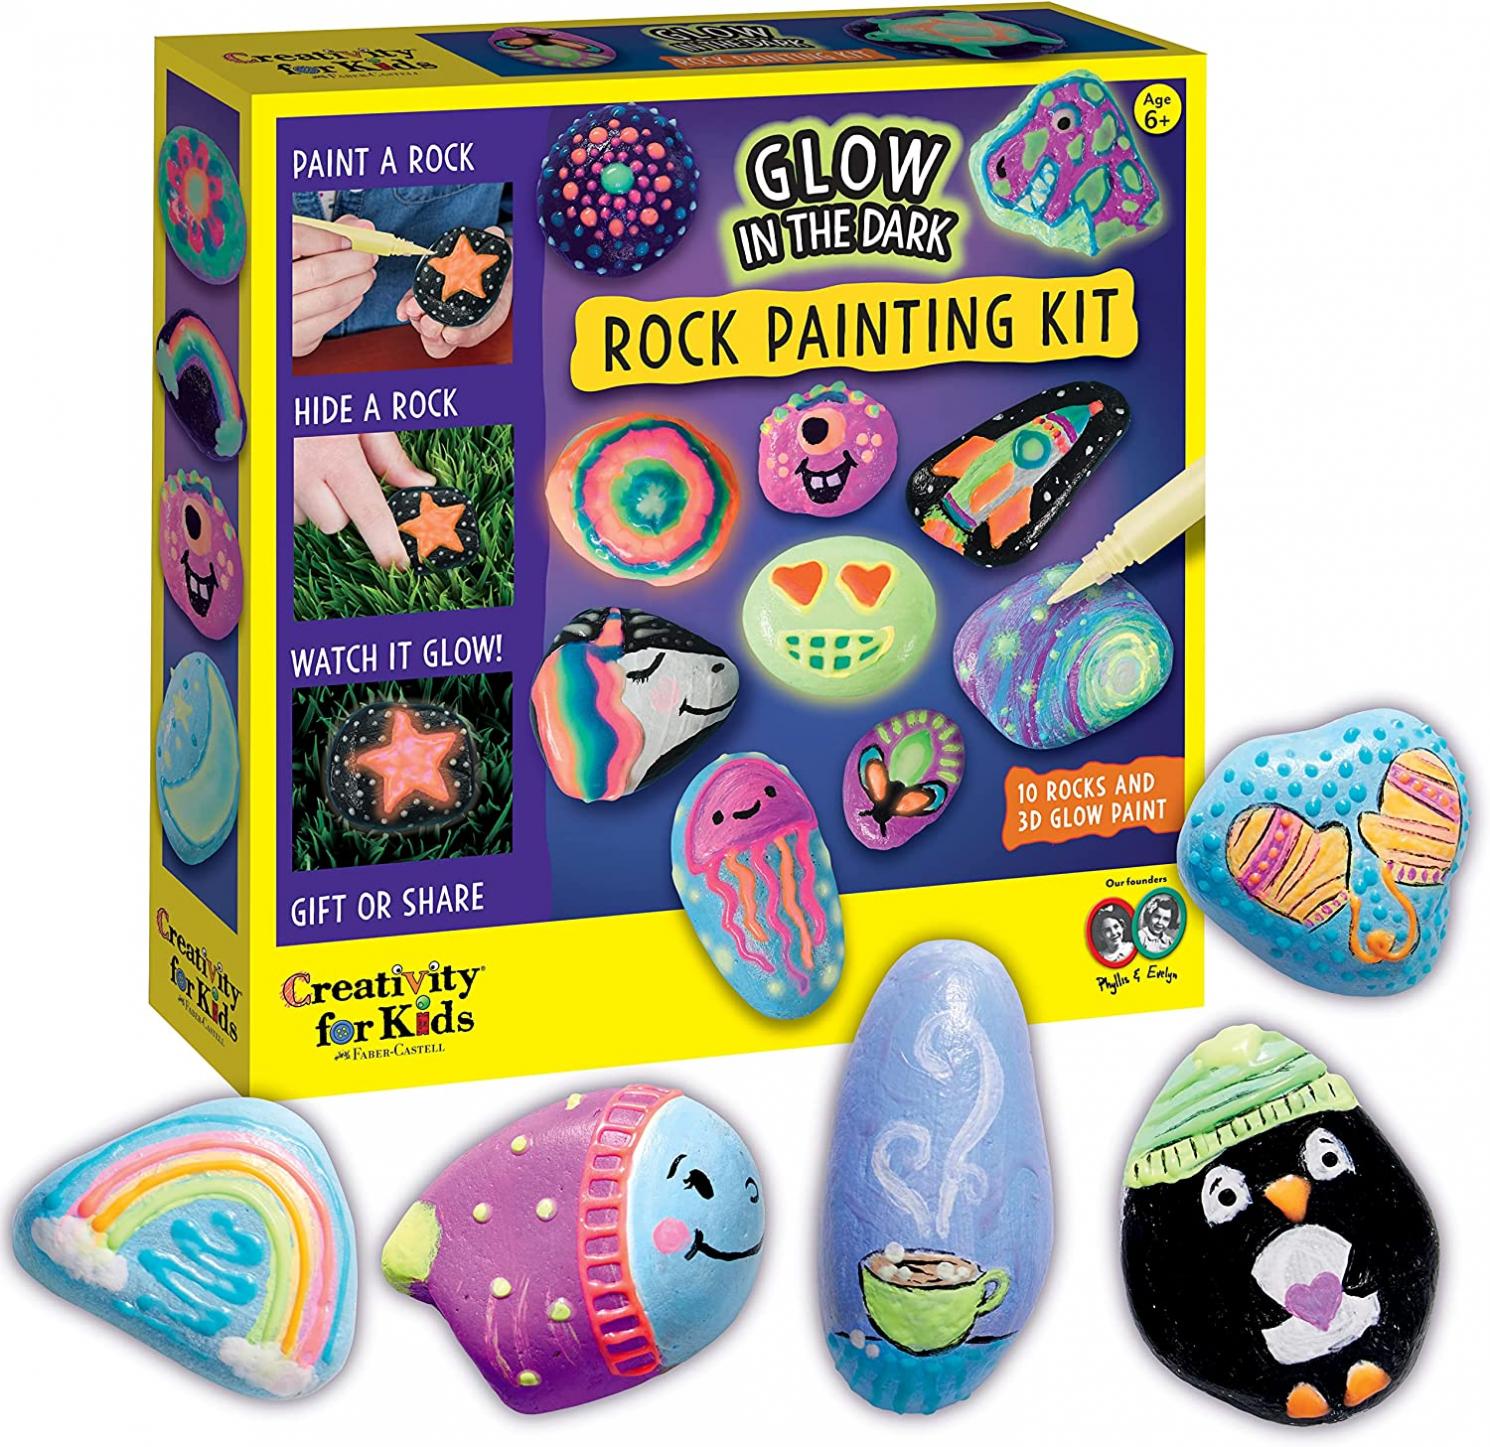 Creativity for Kids Glow in the Dark Rock Painting Kit - Painting Rocks Kids Craft, Arts and Crafts for Kids Ages 6-8+, Creative Gifts for Kids